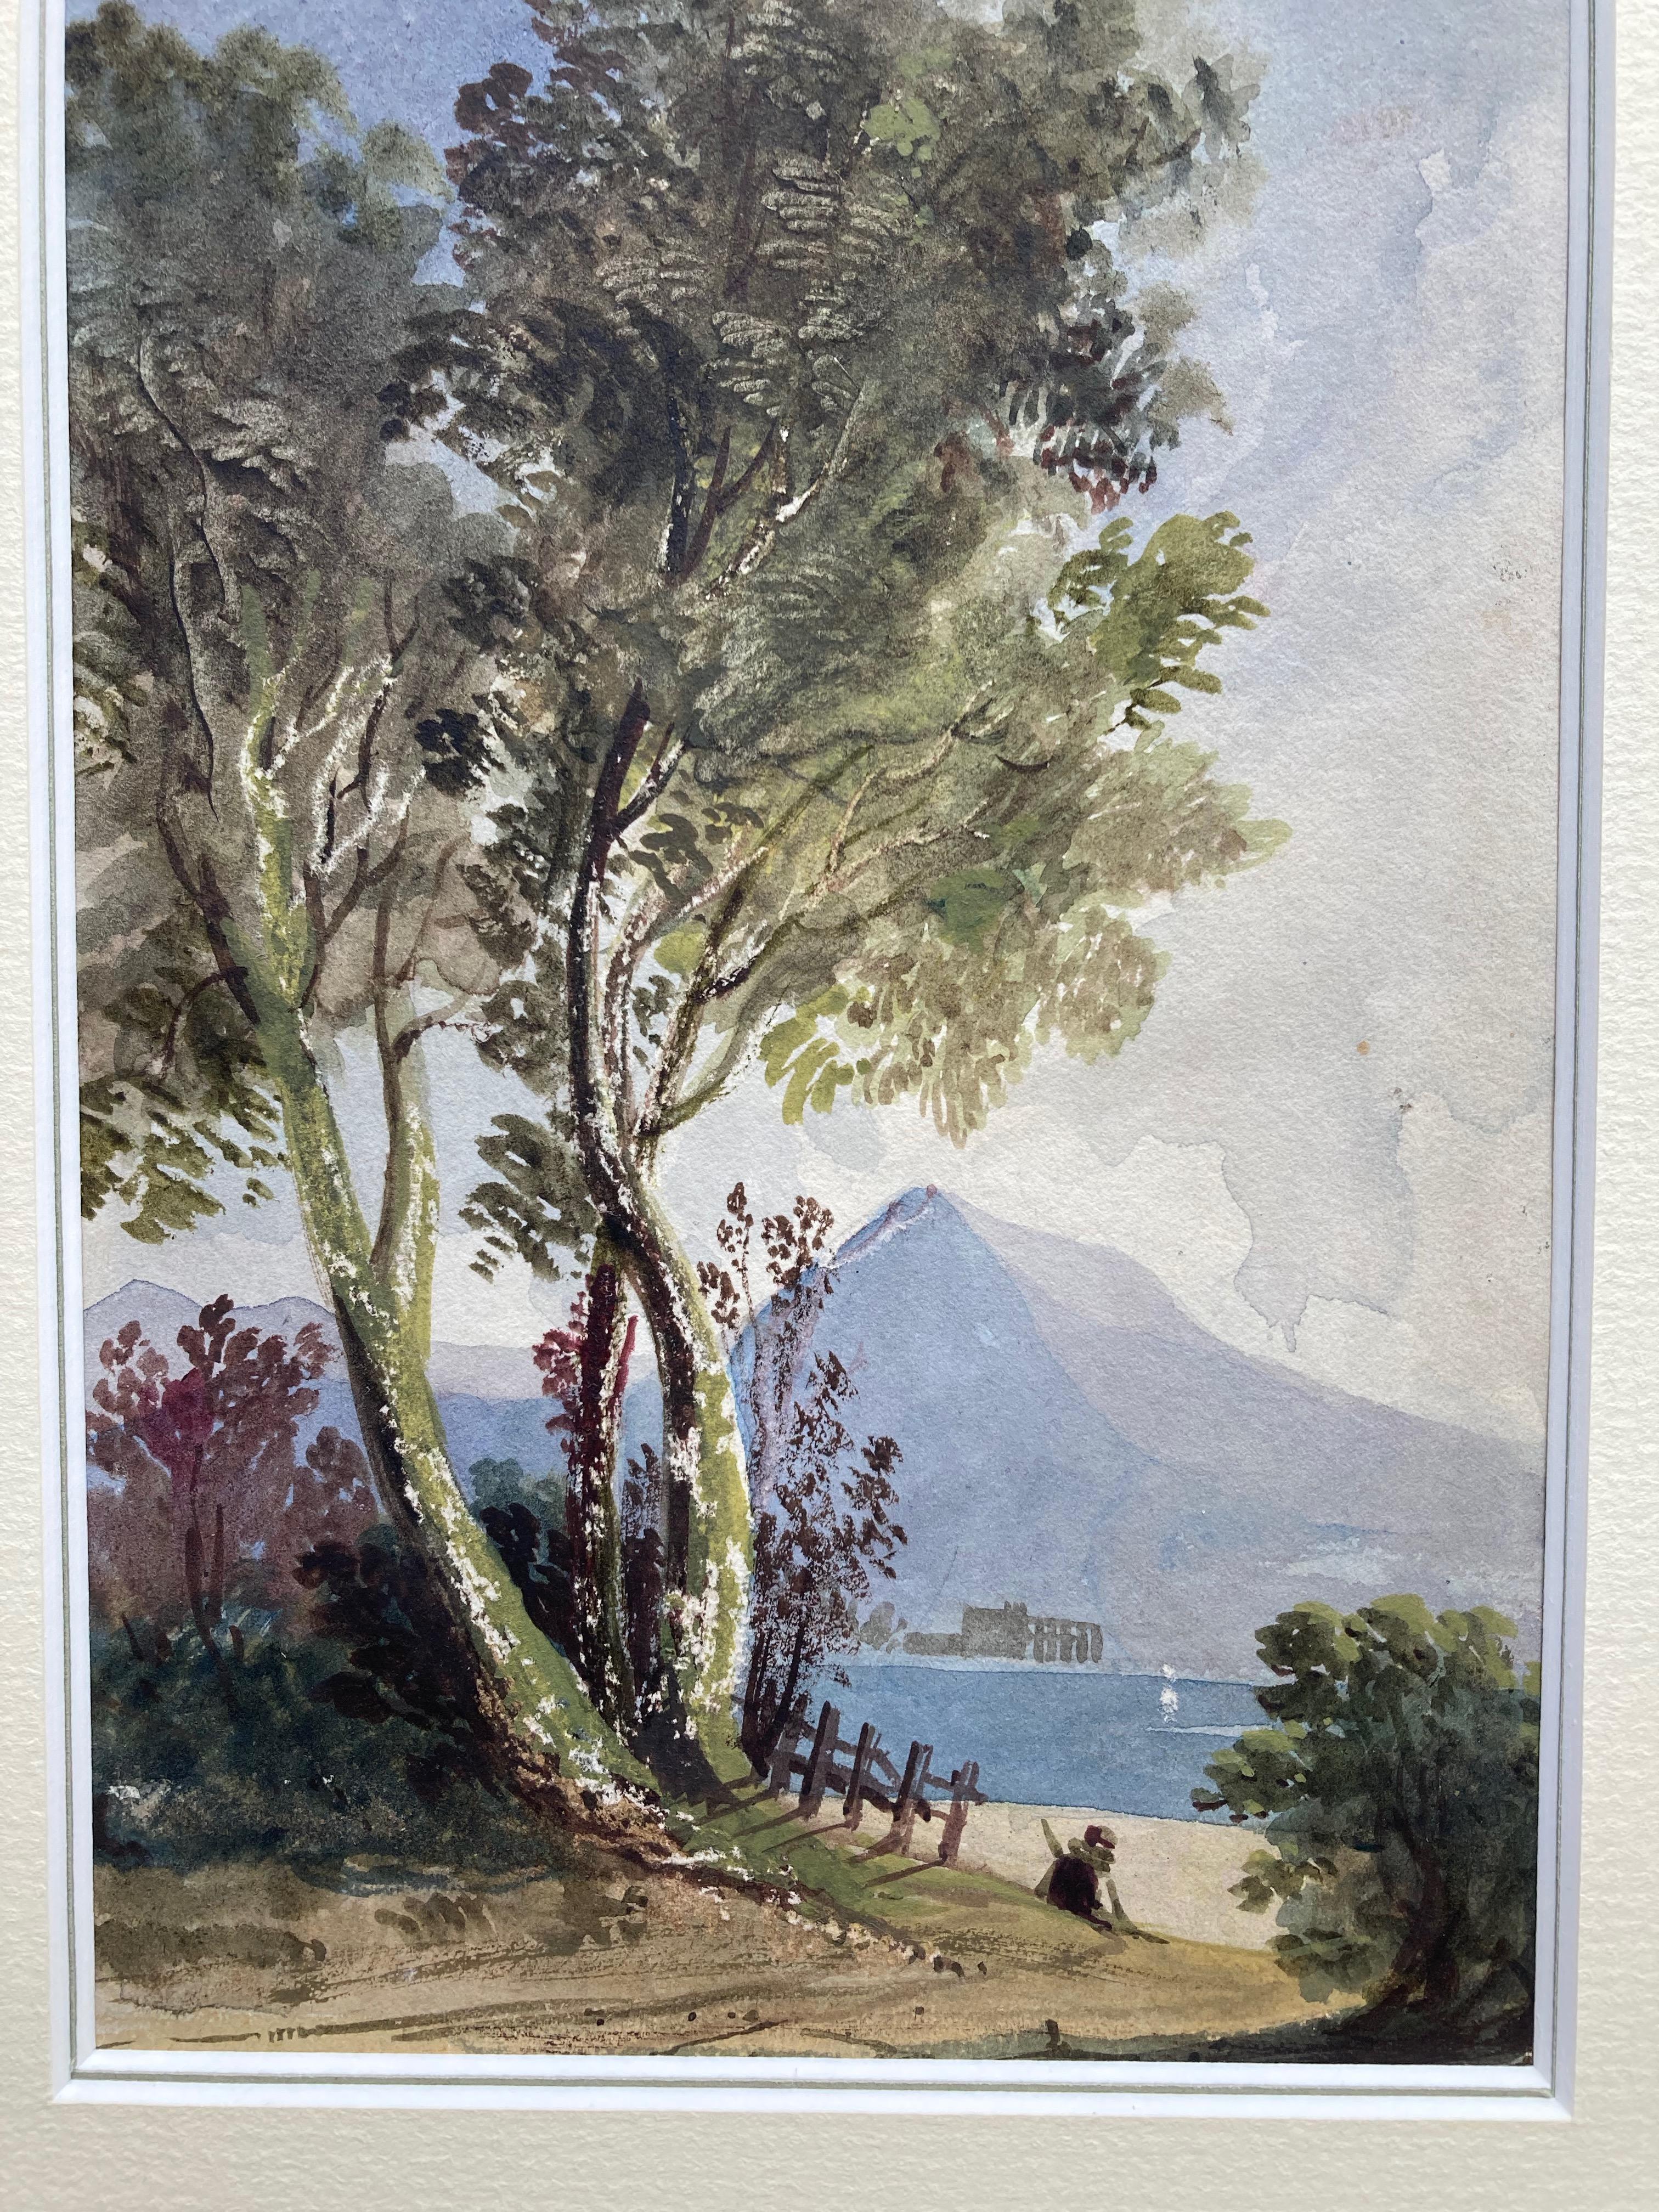 A charming 19th century view of a figure on the shore of a mountain lake, framed by the foliage of a birch tree.

Circle of John Varley (1778-1842)
Figure on the shore of a mountain lake
Watercolour with scratching out.
7 x 4¾ inches
13½ x 10¾